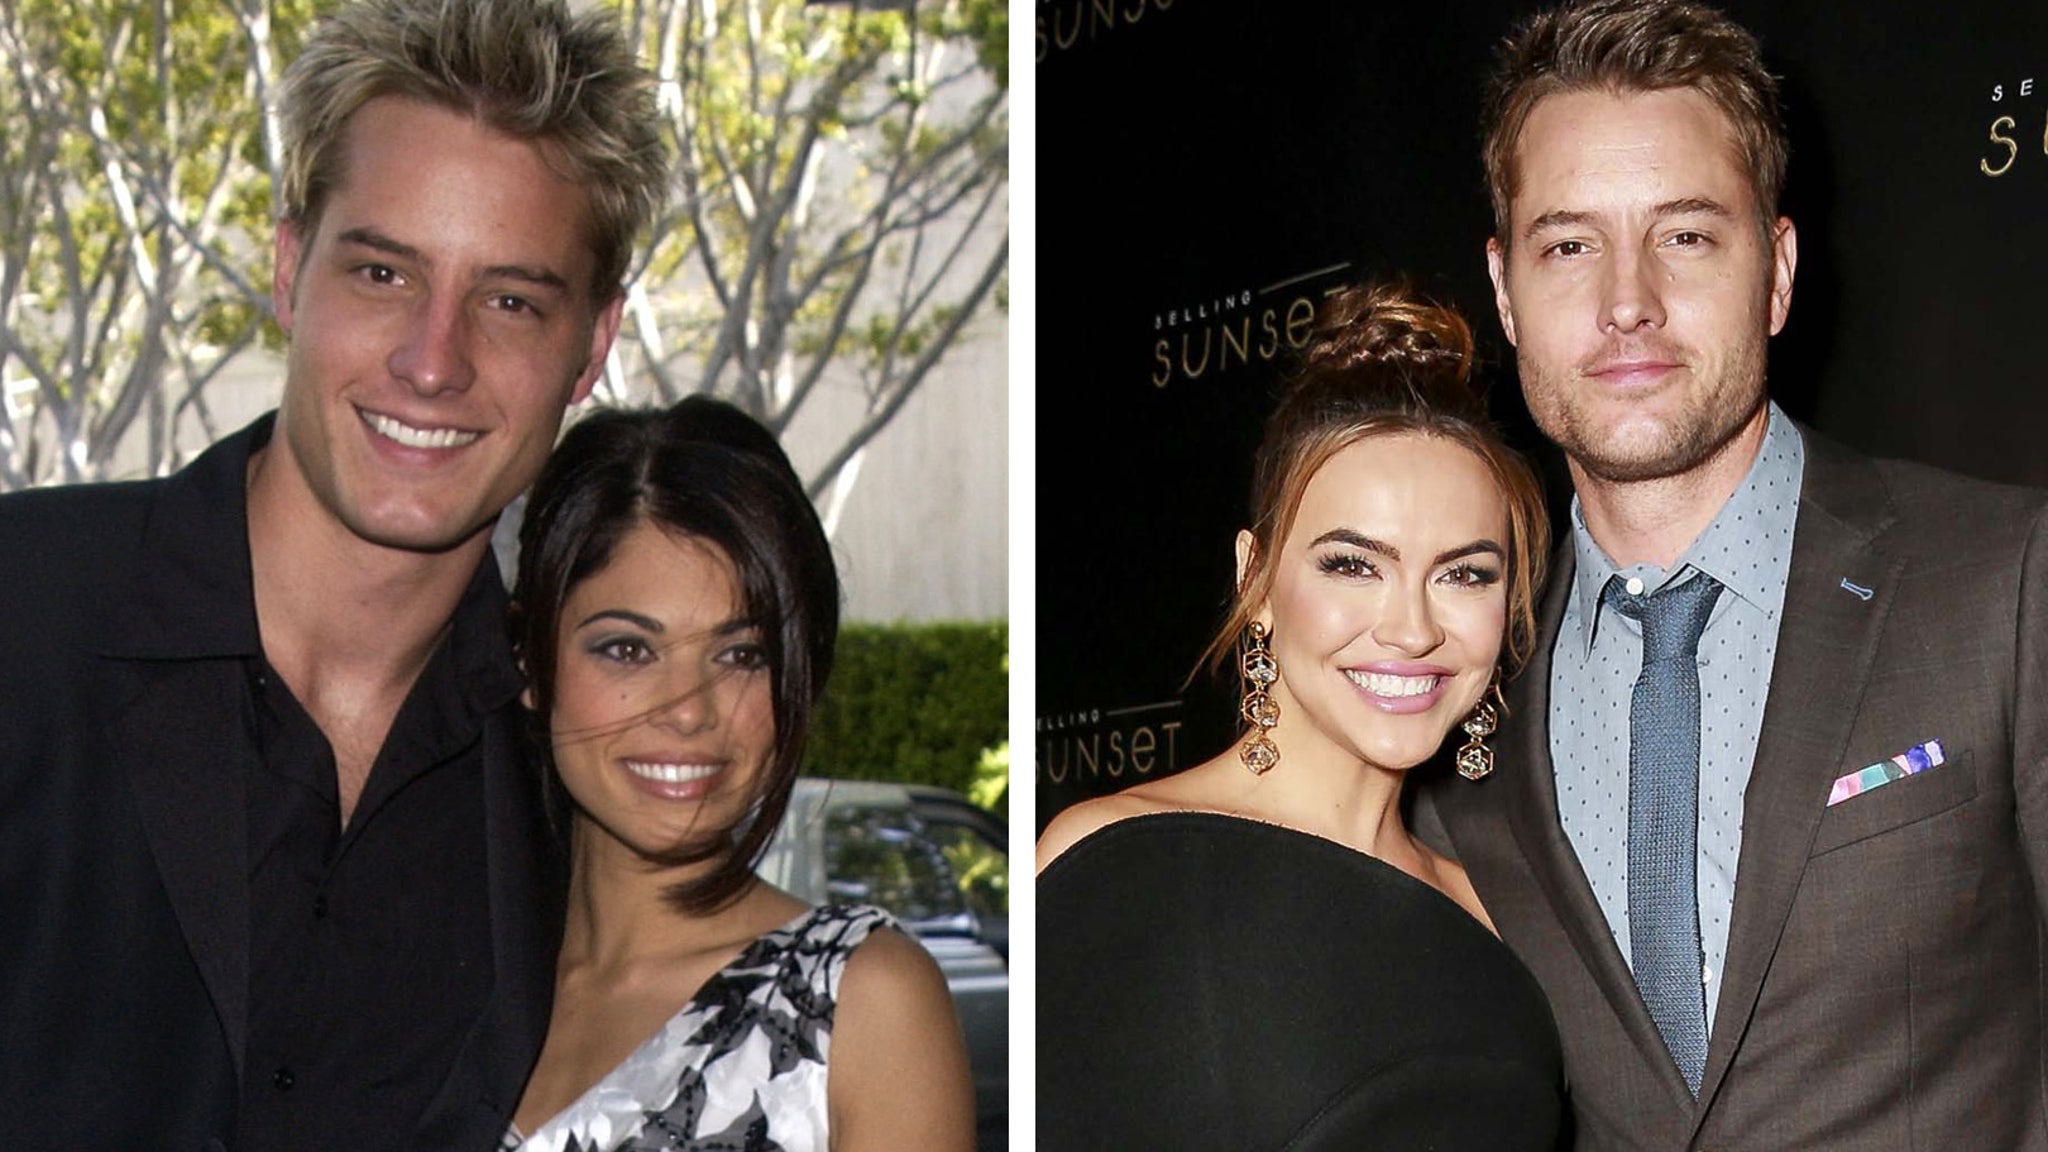 Justin Hartley's Ex Lindsay Defends Him, Chrishell Stause Likes Fan Tweet Assuming He Cheated - TooFab